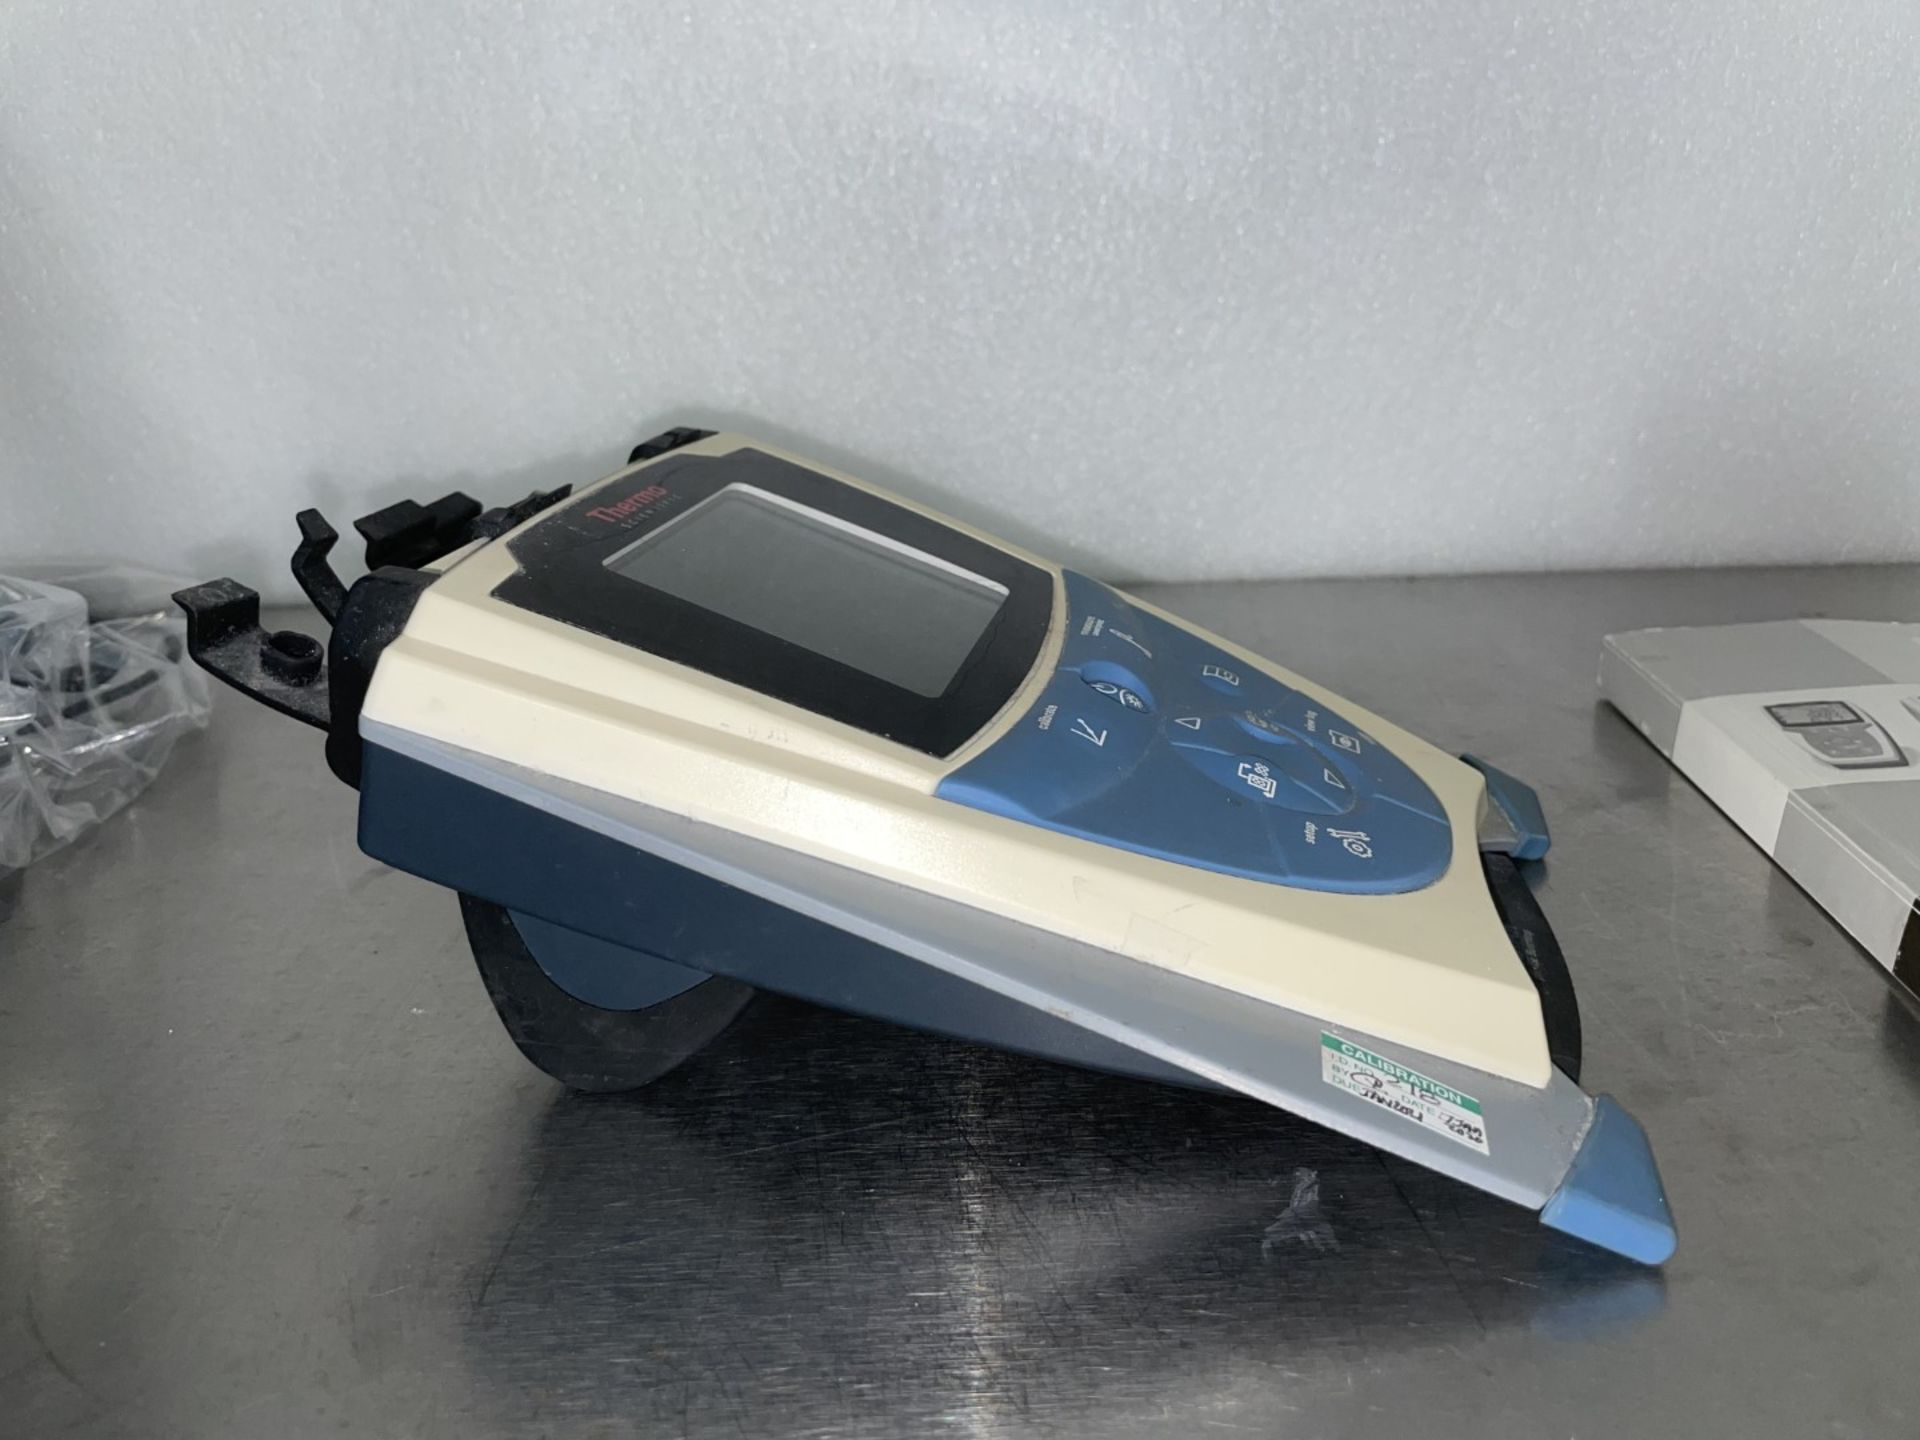 Thermo Scientific Benchtop pH Meter, Model Orion 4-Star Plus PH/ISE - Image 4 of 6